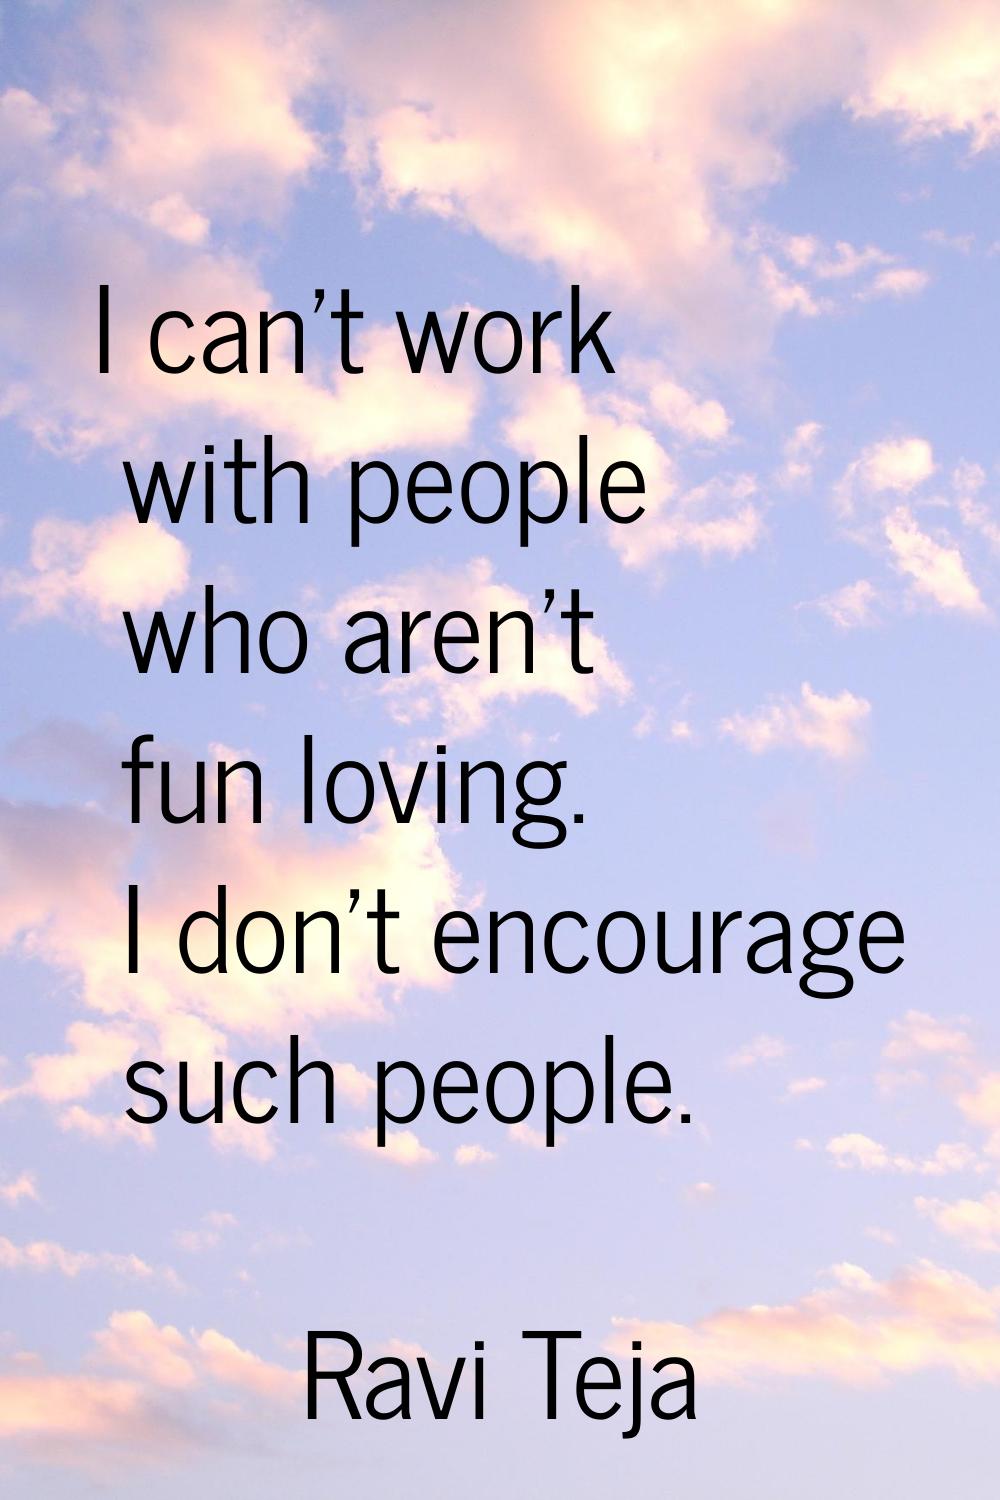 I can't work with people who aren't fun loving. I don't encourage such people.